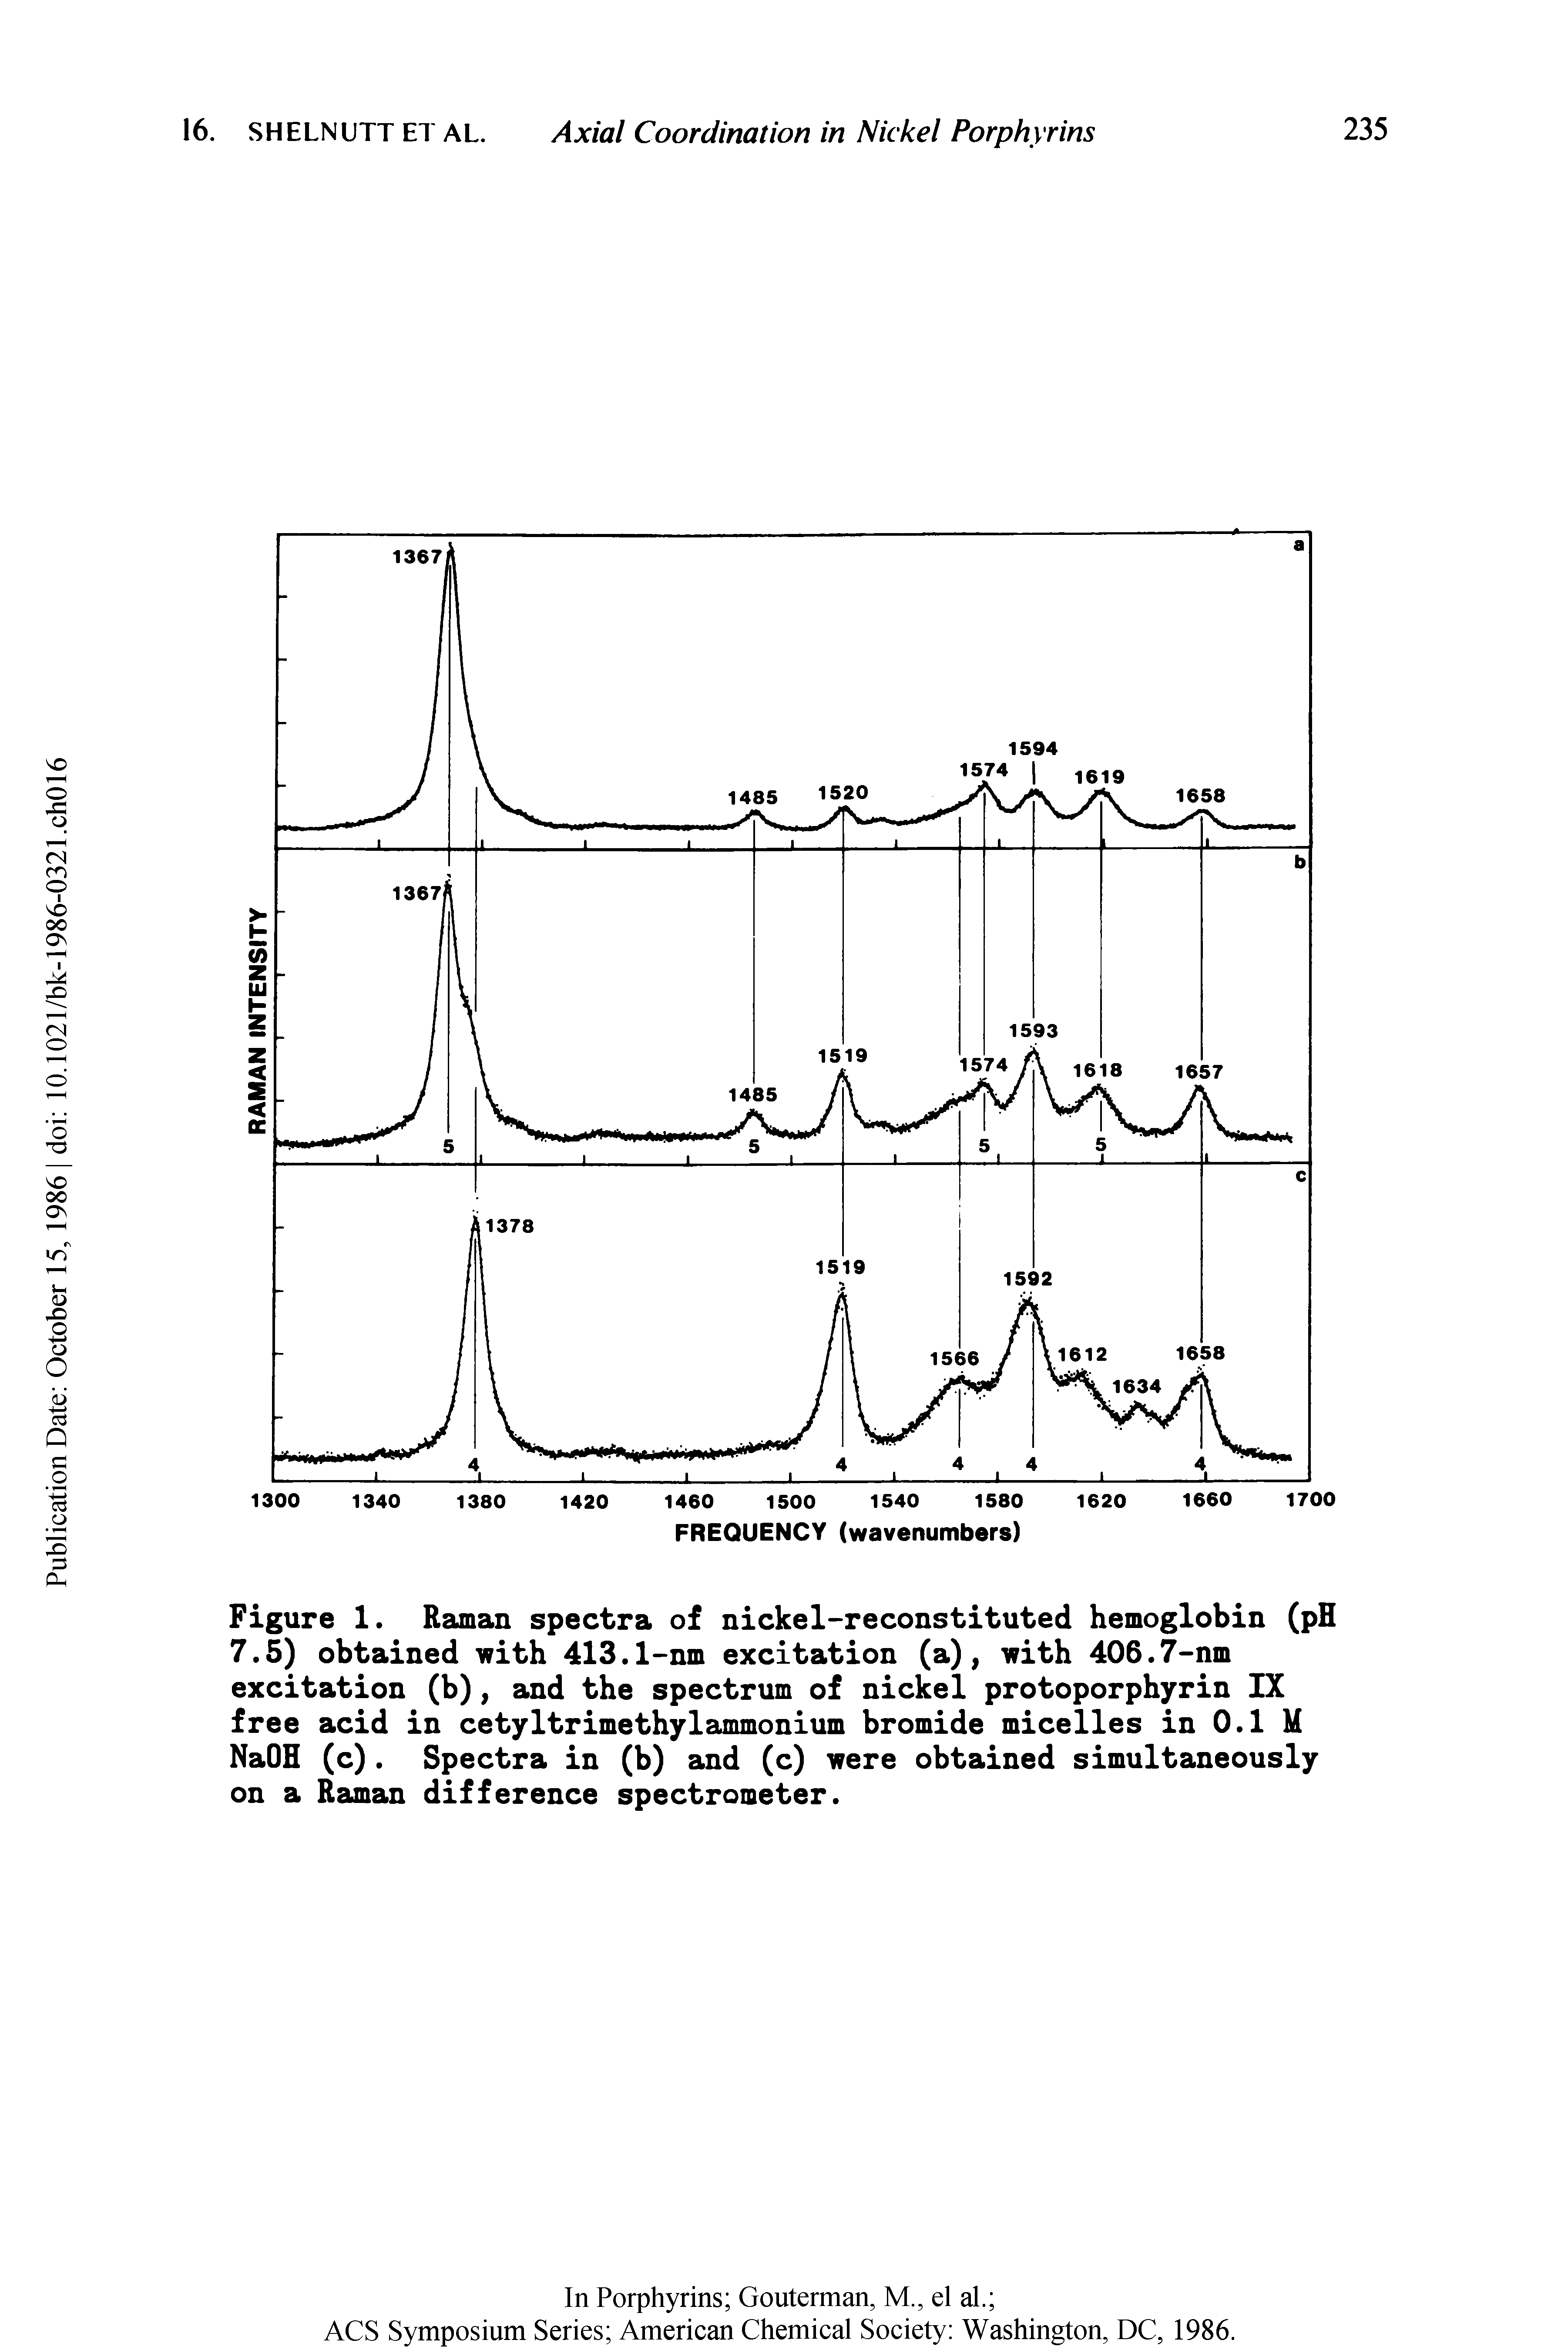 Figure 1. Raman spectra of nickel-reconstituted hemoglobin (pH 7.5) obtained with 413.1-nm excitation (a), with 406.7-nm excitation (b), and the spectrum of nickel protoporphyrin IX free acid in cetyltrimethylammonium bromide micelles in 0.1 M NaOH (c). Spectra in (b) and (c) were obtained simultaneously on a Raman difference spectrometer.